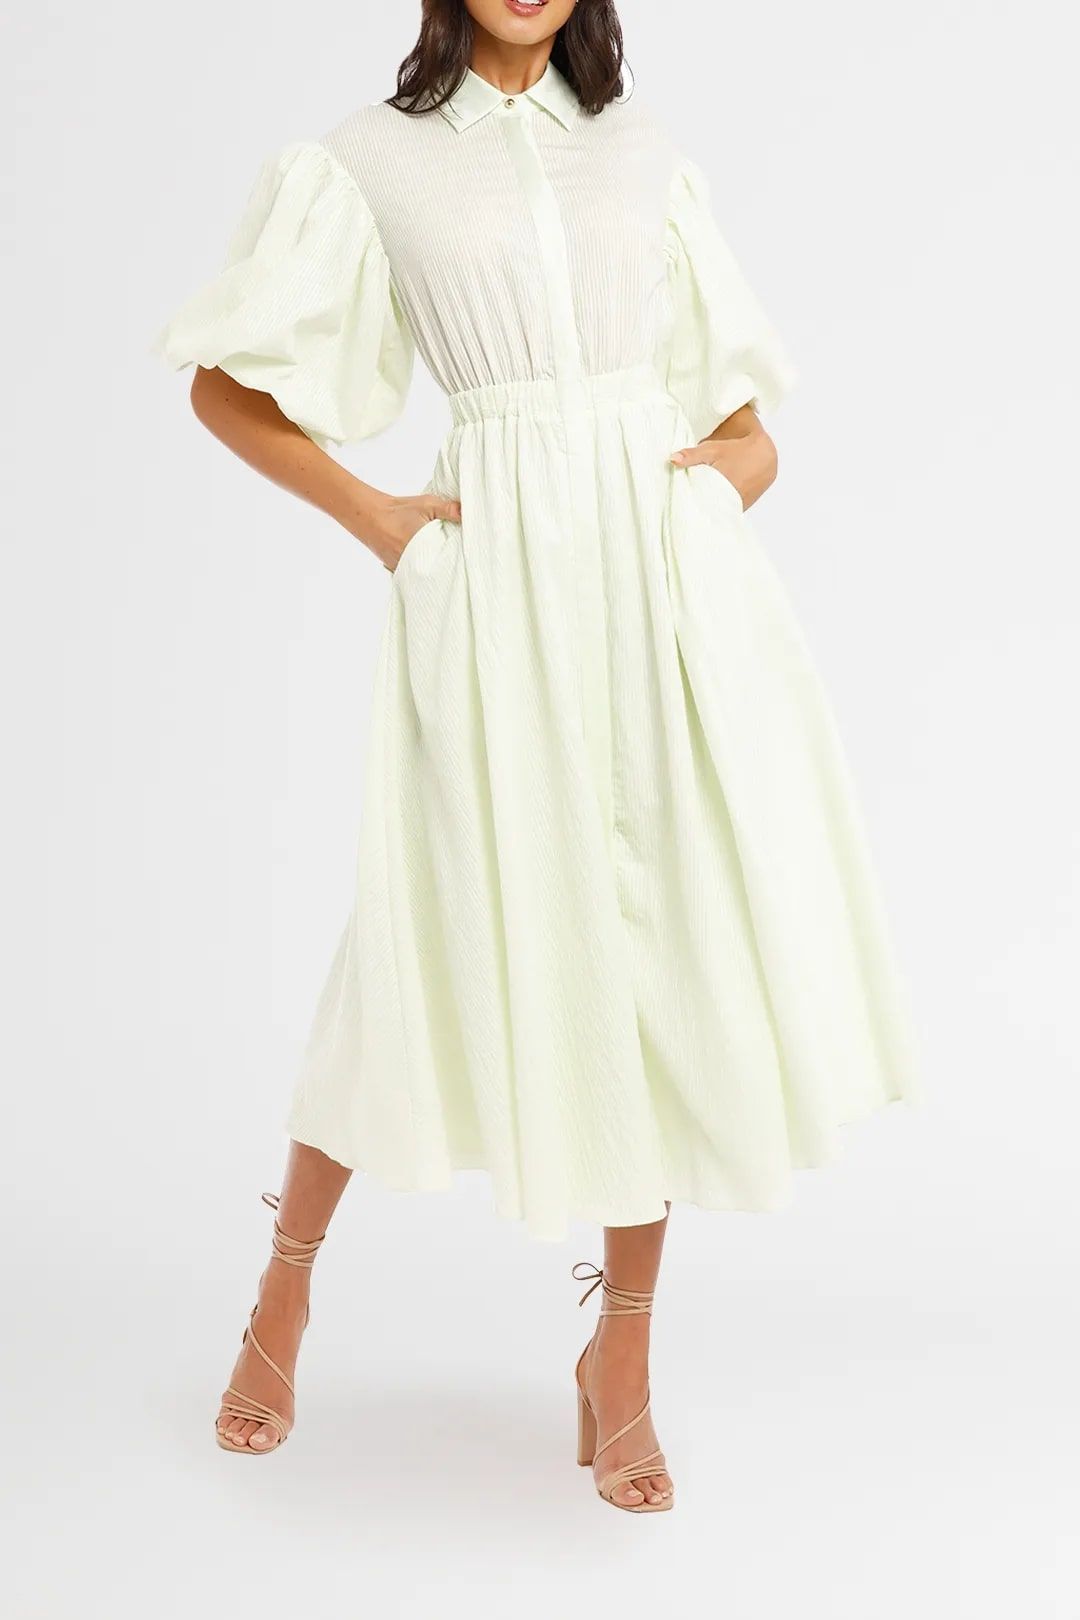 Hire Glebe dress in iced mint for wedding guests.